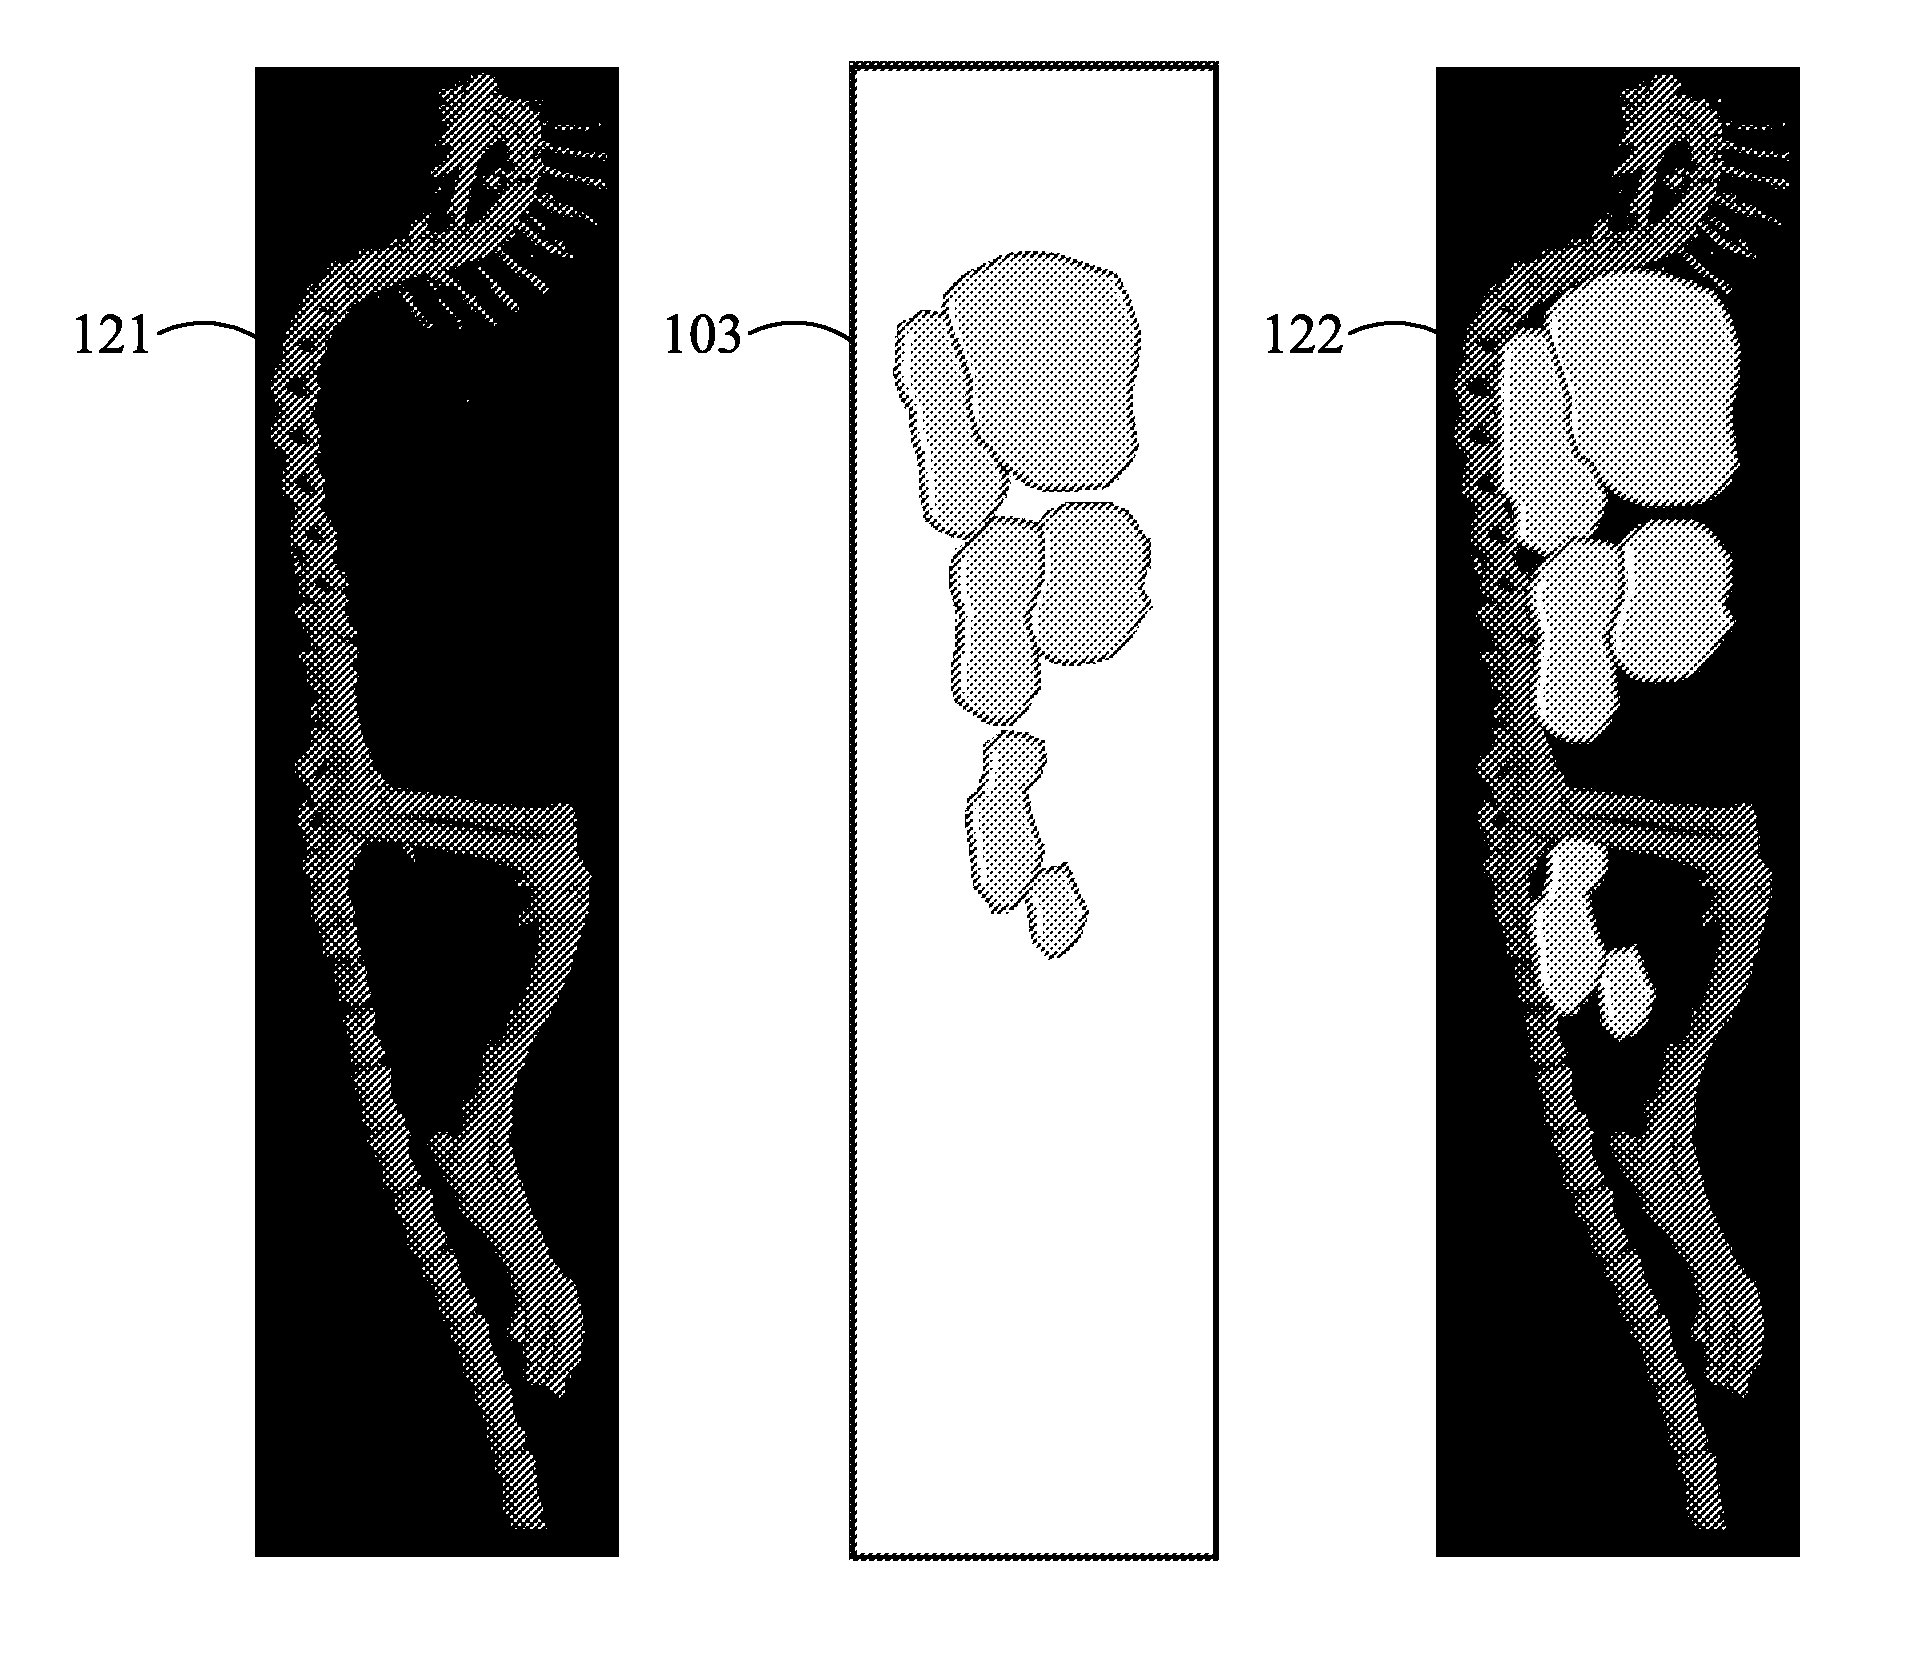 Volume-of-interest segmentation system for use with molecular imaging quantization